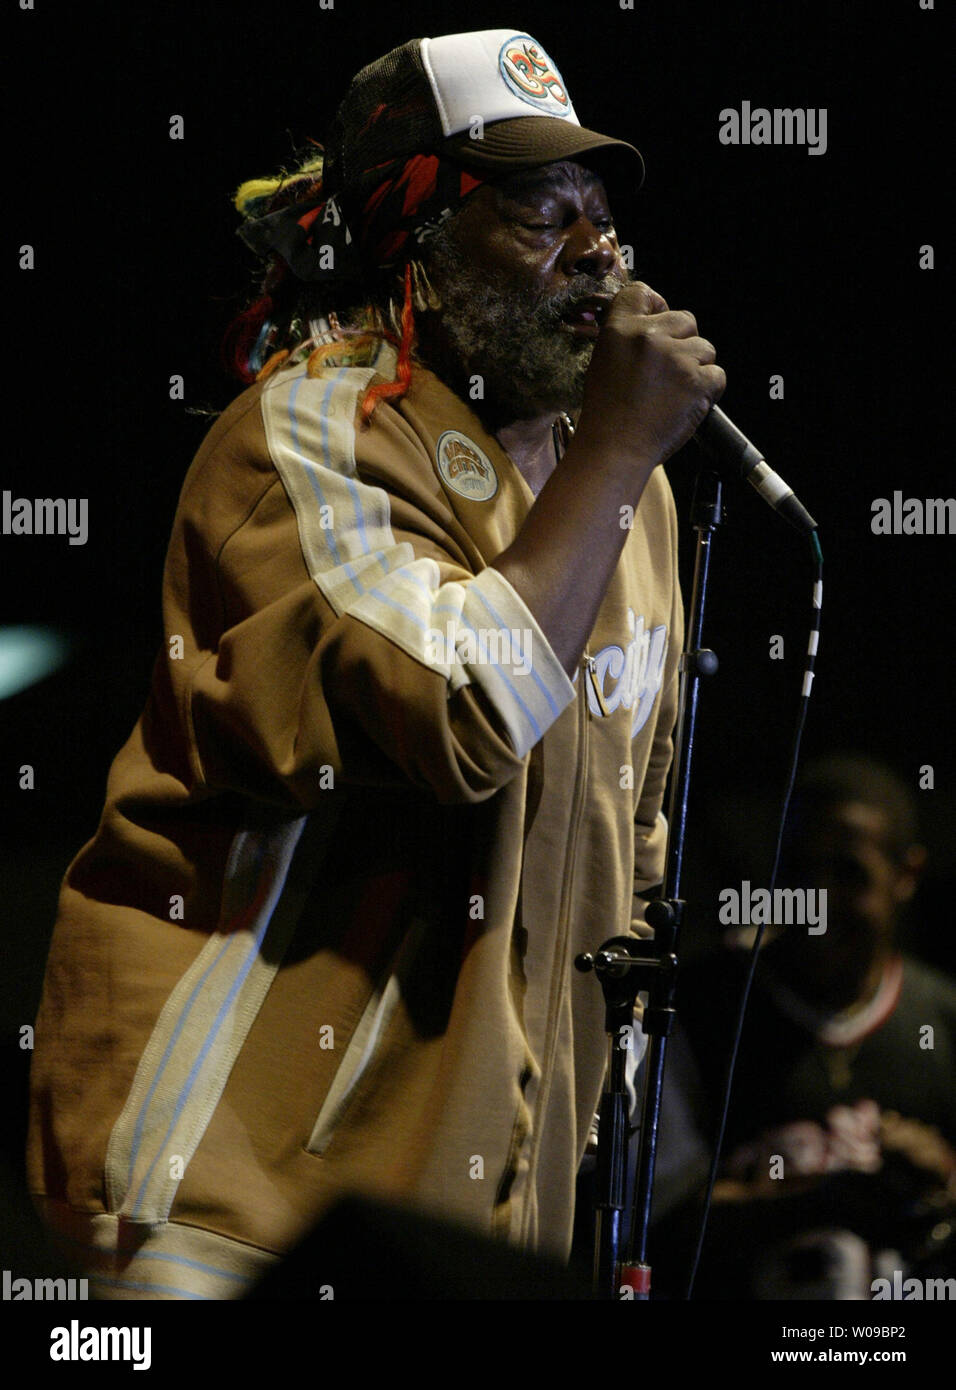 George Clinton performed with Parliament/Funkadelic during the first day of the Beale Street Music Festival on Friday, April 30, 2004 at Tom Lee Park in Memphis, Tenn. (UPI Photo/Billy Suratt) Stock Photo